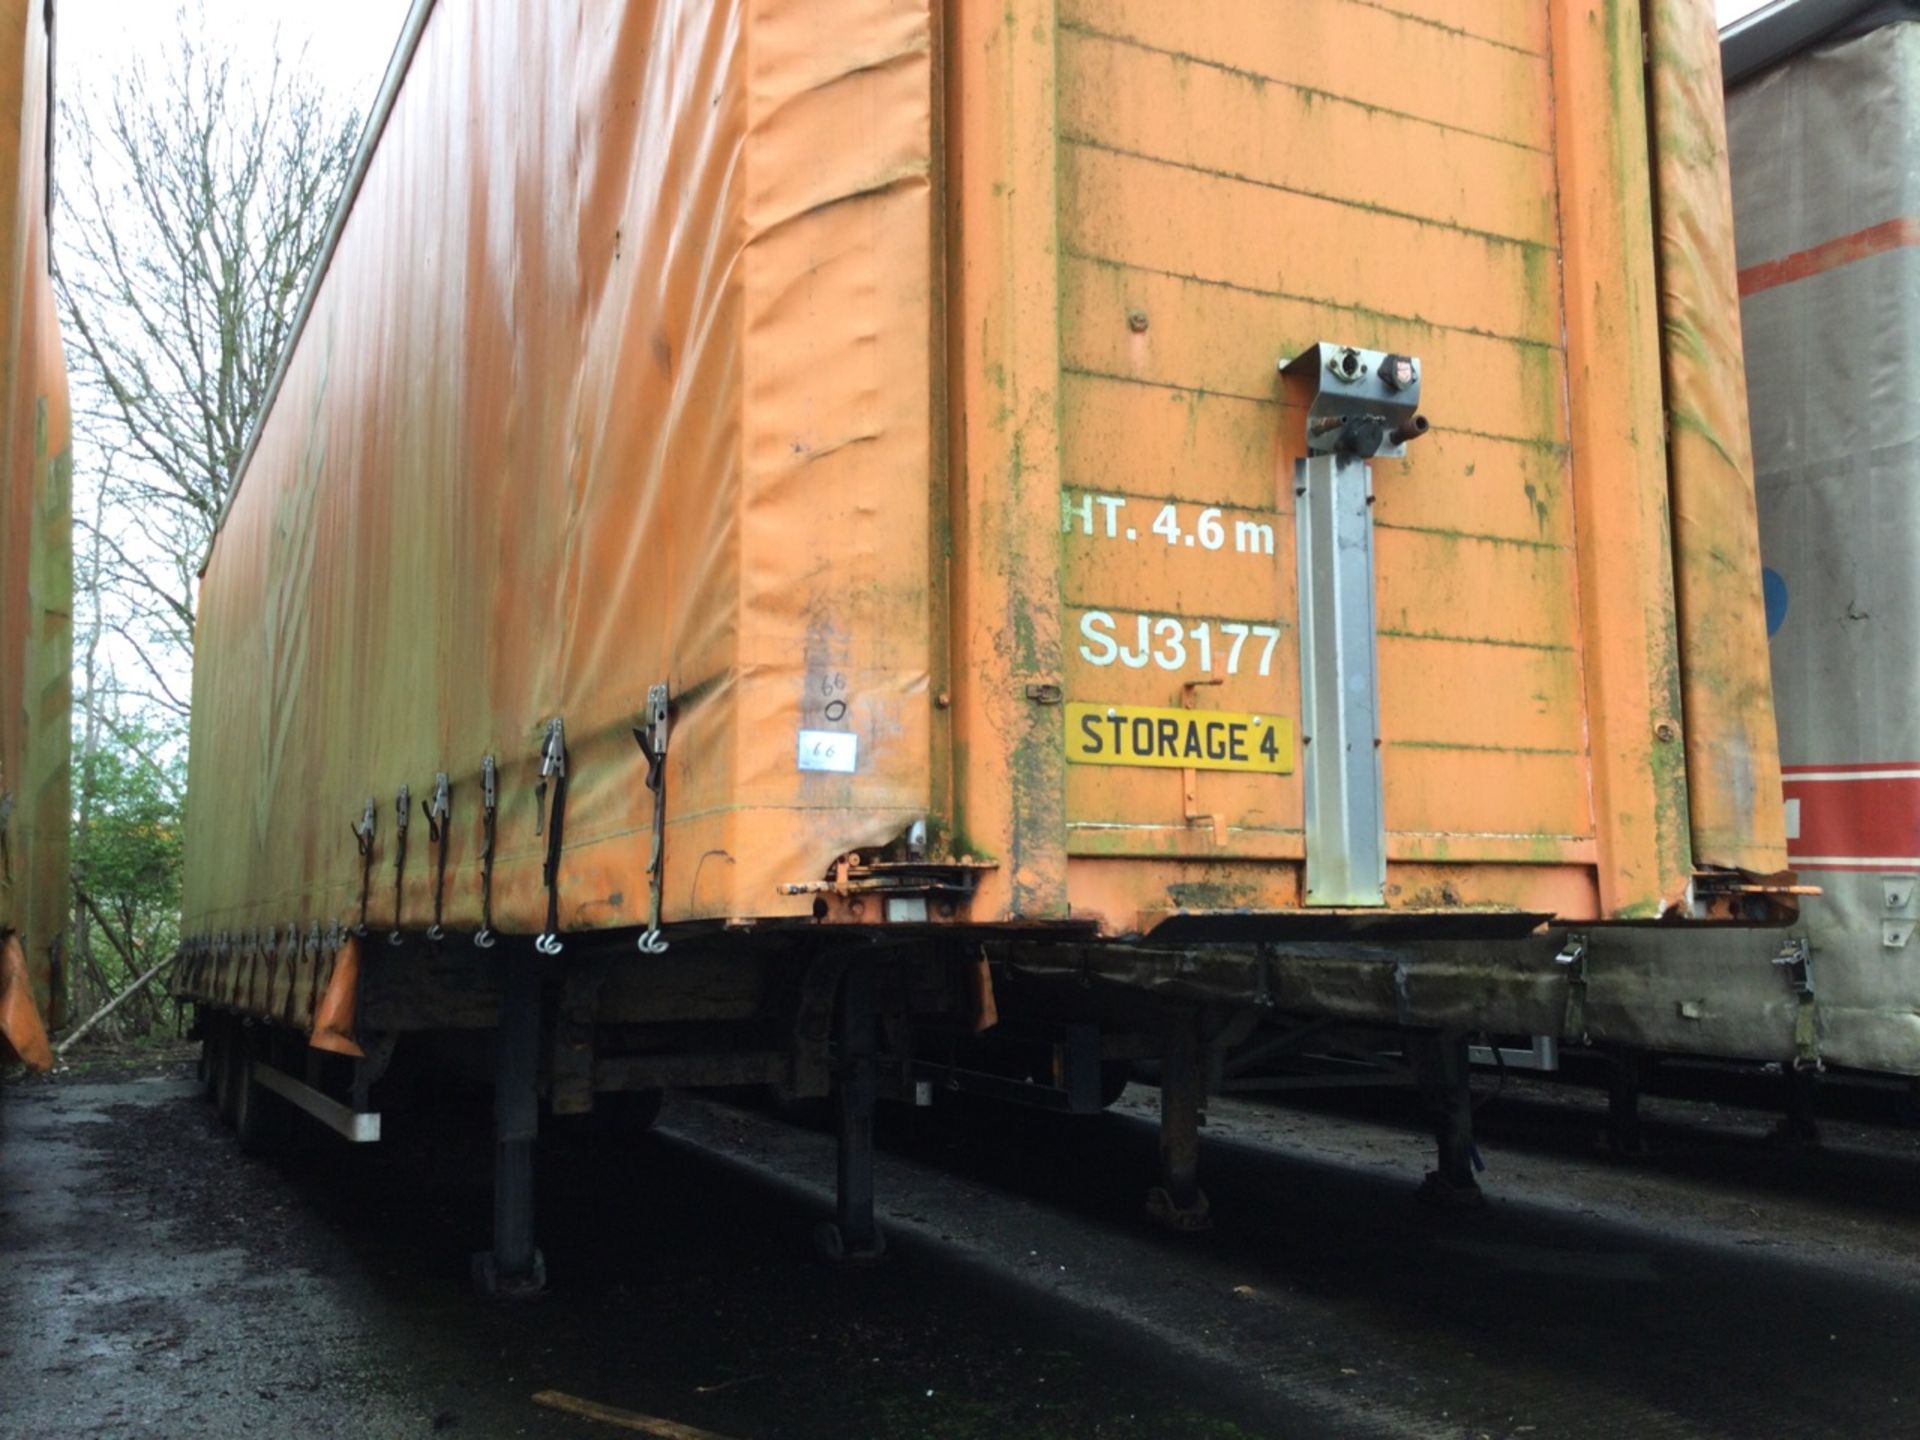 SDC Tri-Axle Curtainside Trailer . Note - No BP on this lot